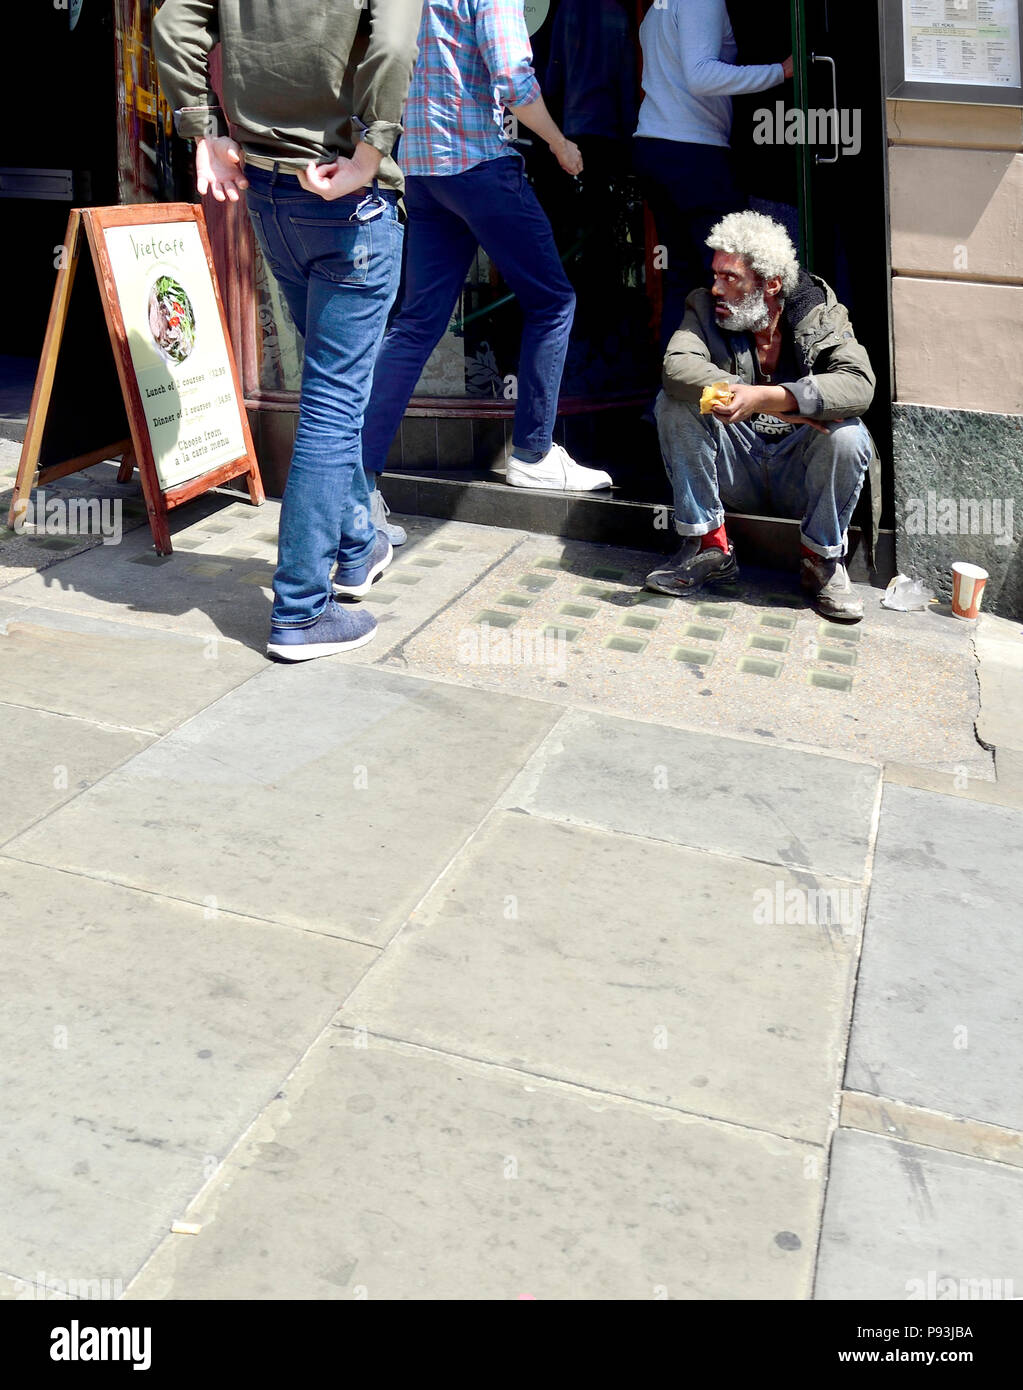 Black man with white hair and beard sitting on the step of a restaurant as people walk in past him, Whitehall, London, England, UK. Stock Photo